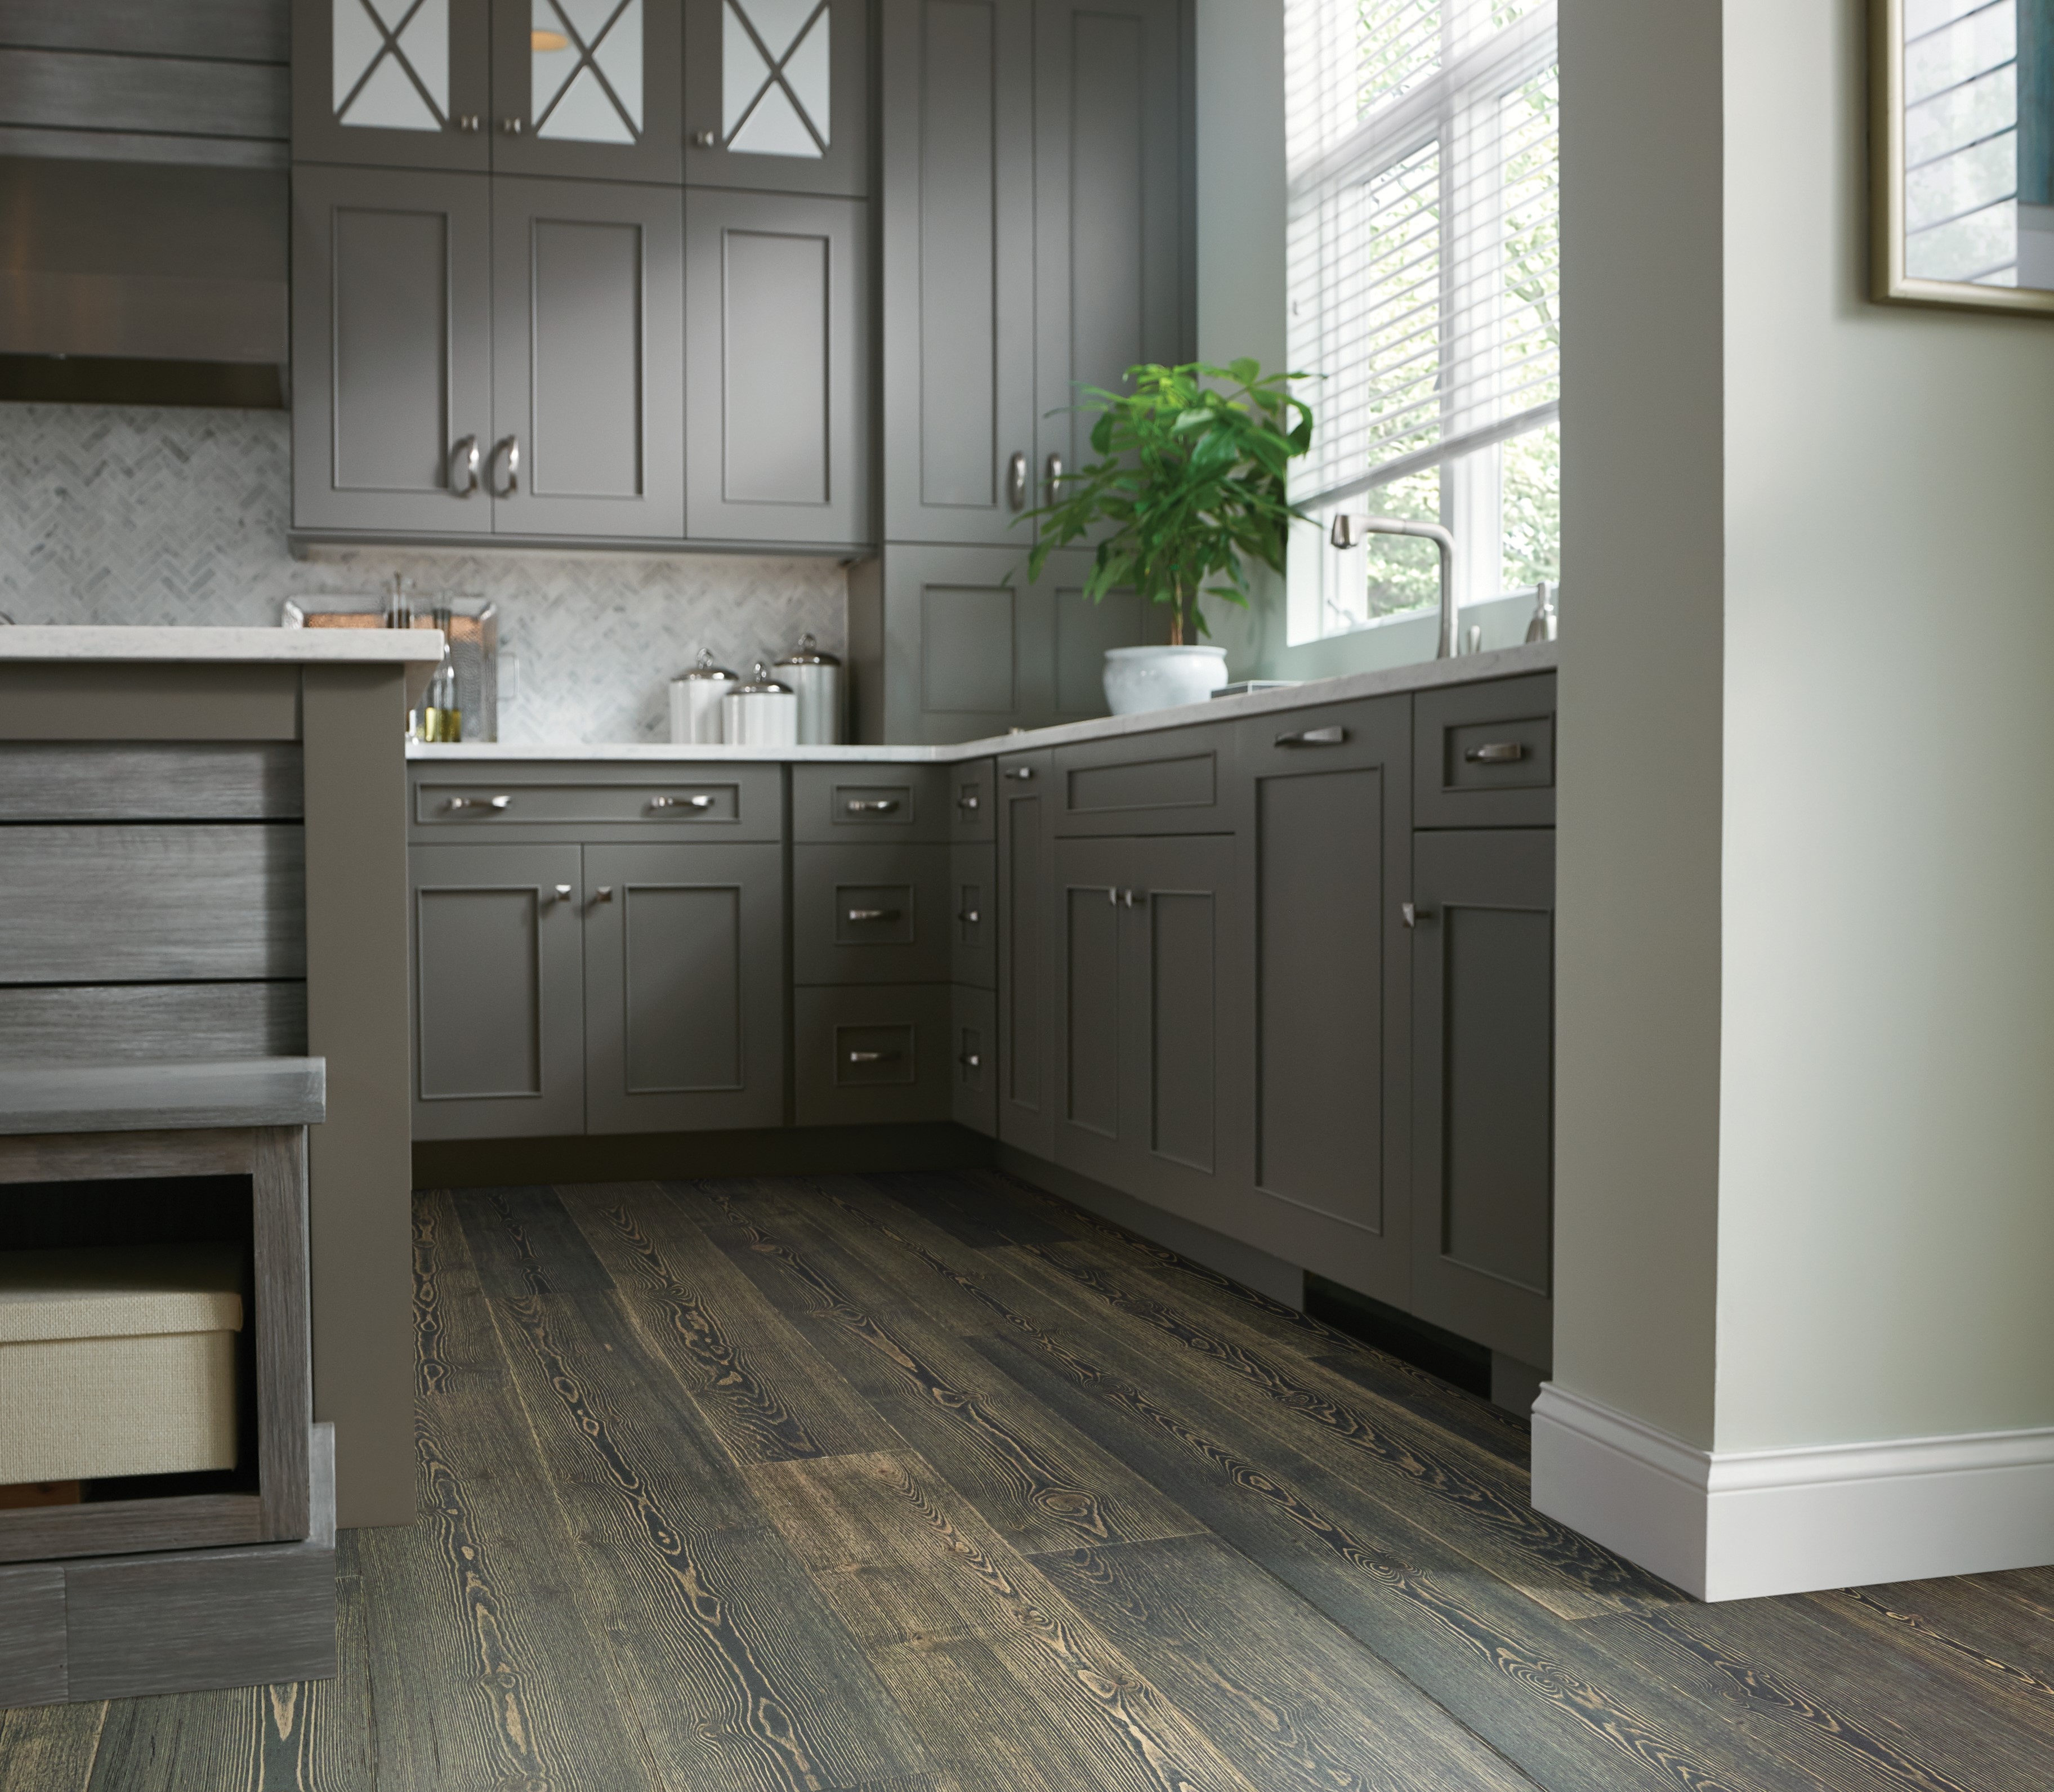 Exquisite-Midnight Pine hardwood in a kitchen featuring brown, contemporary cabinetry and island